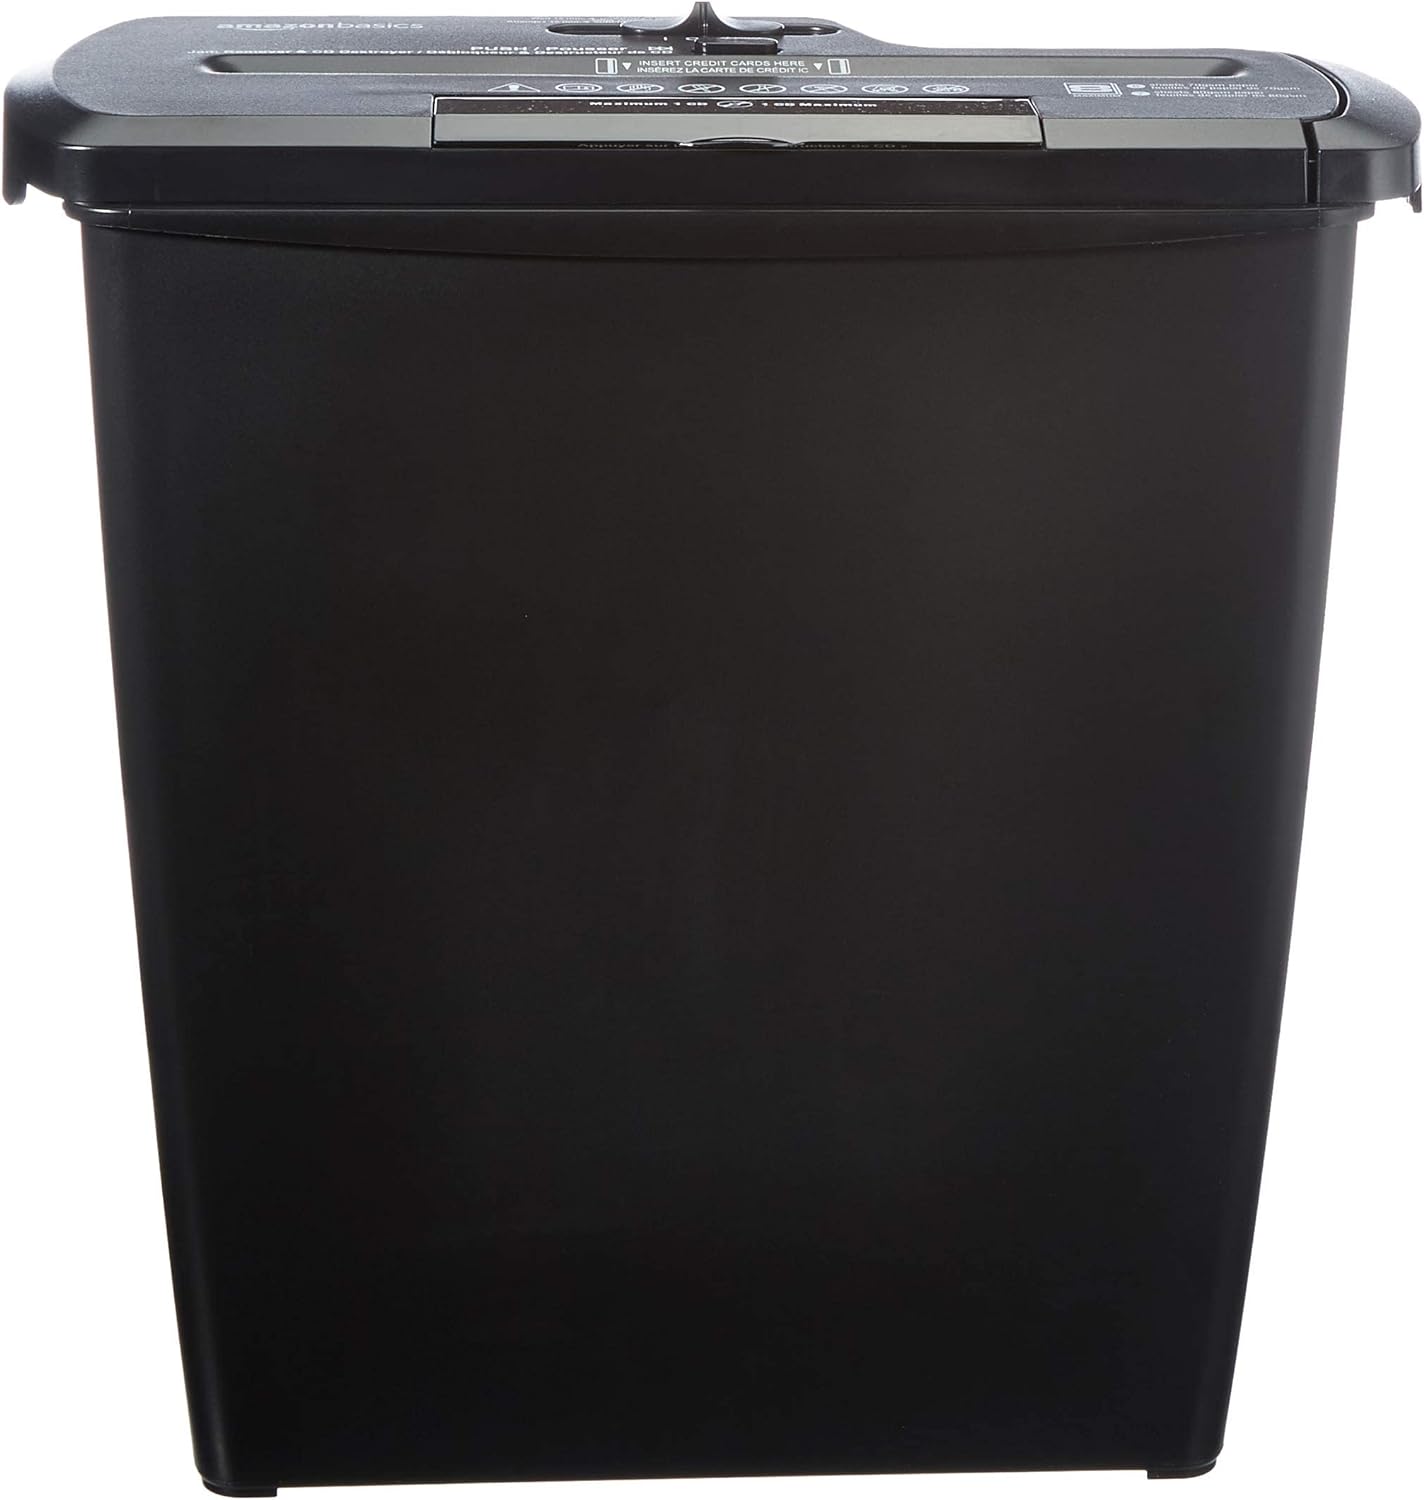 Amazon Basics 7-8 Sheet Strip Cut Paper, Credit Card, CD & DVD Shredder with Bin for Business & Home Office Use with Paper Reverse Function, Black 8417